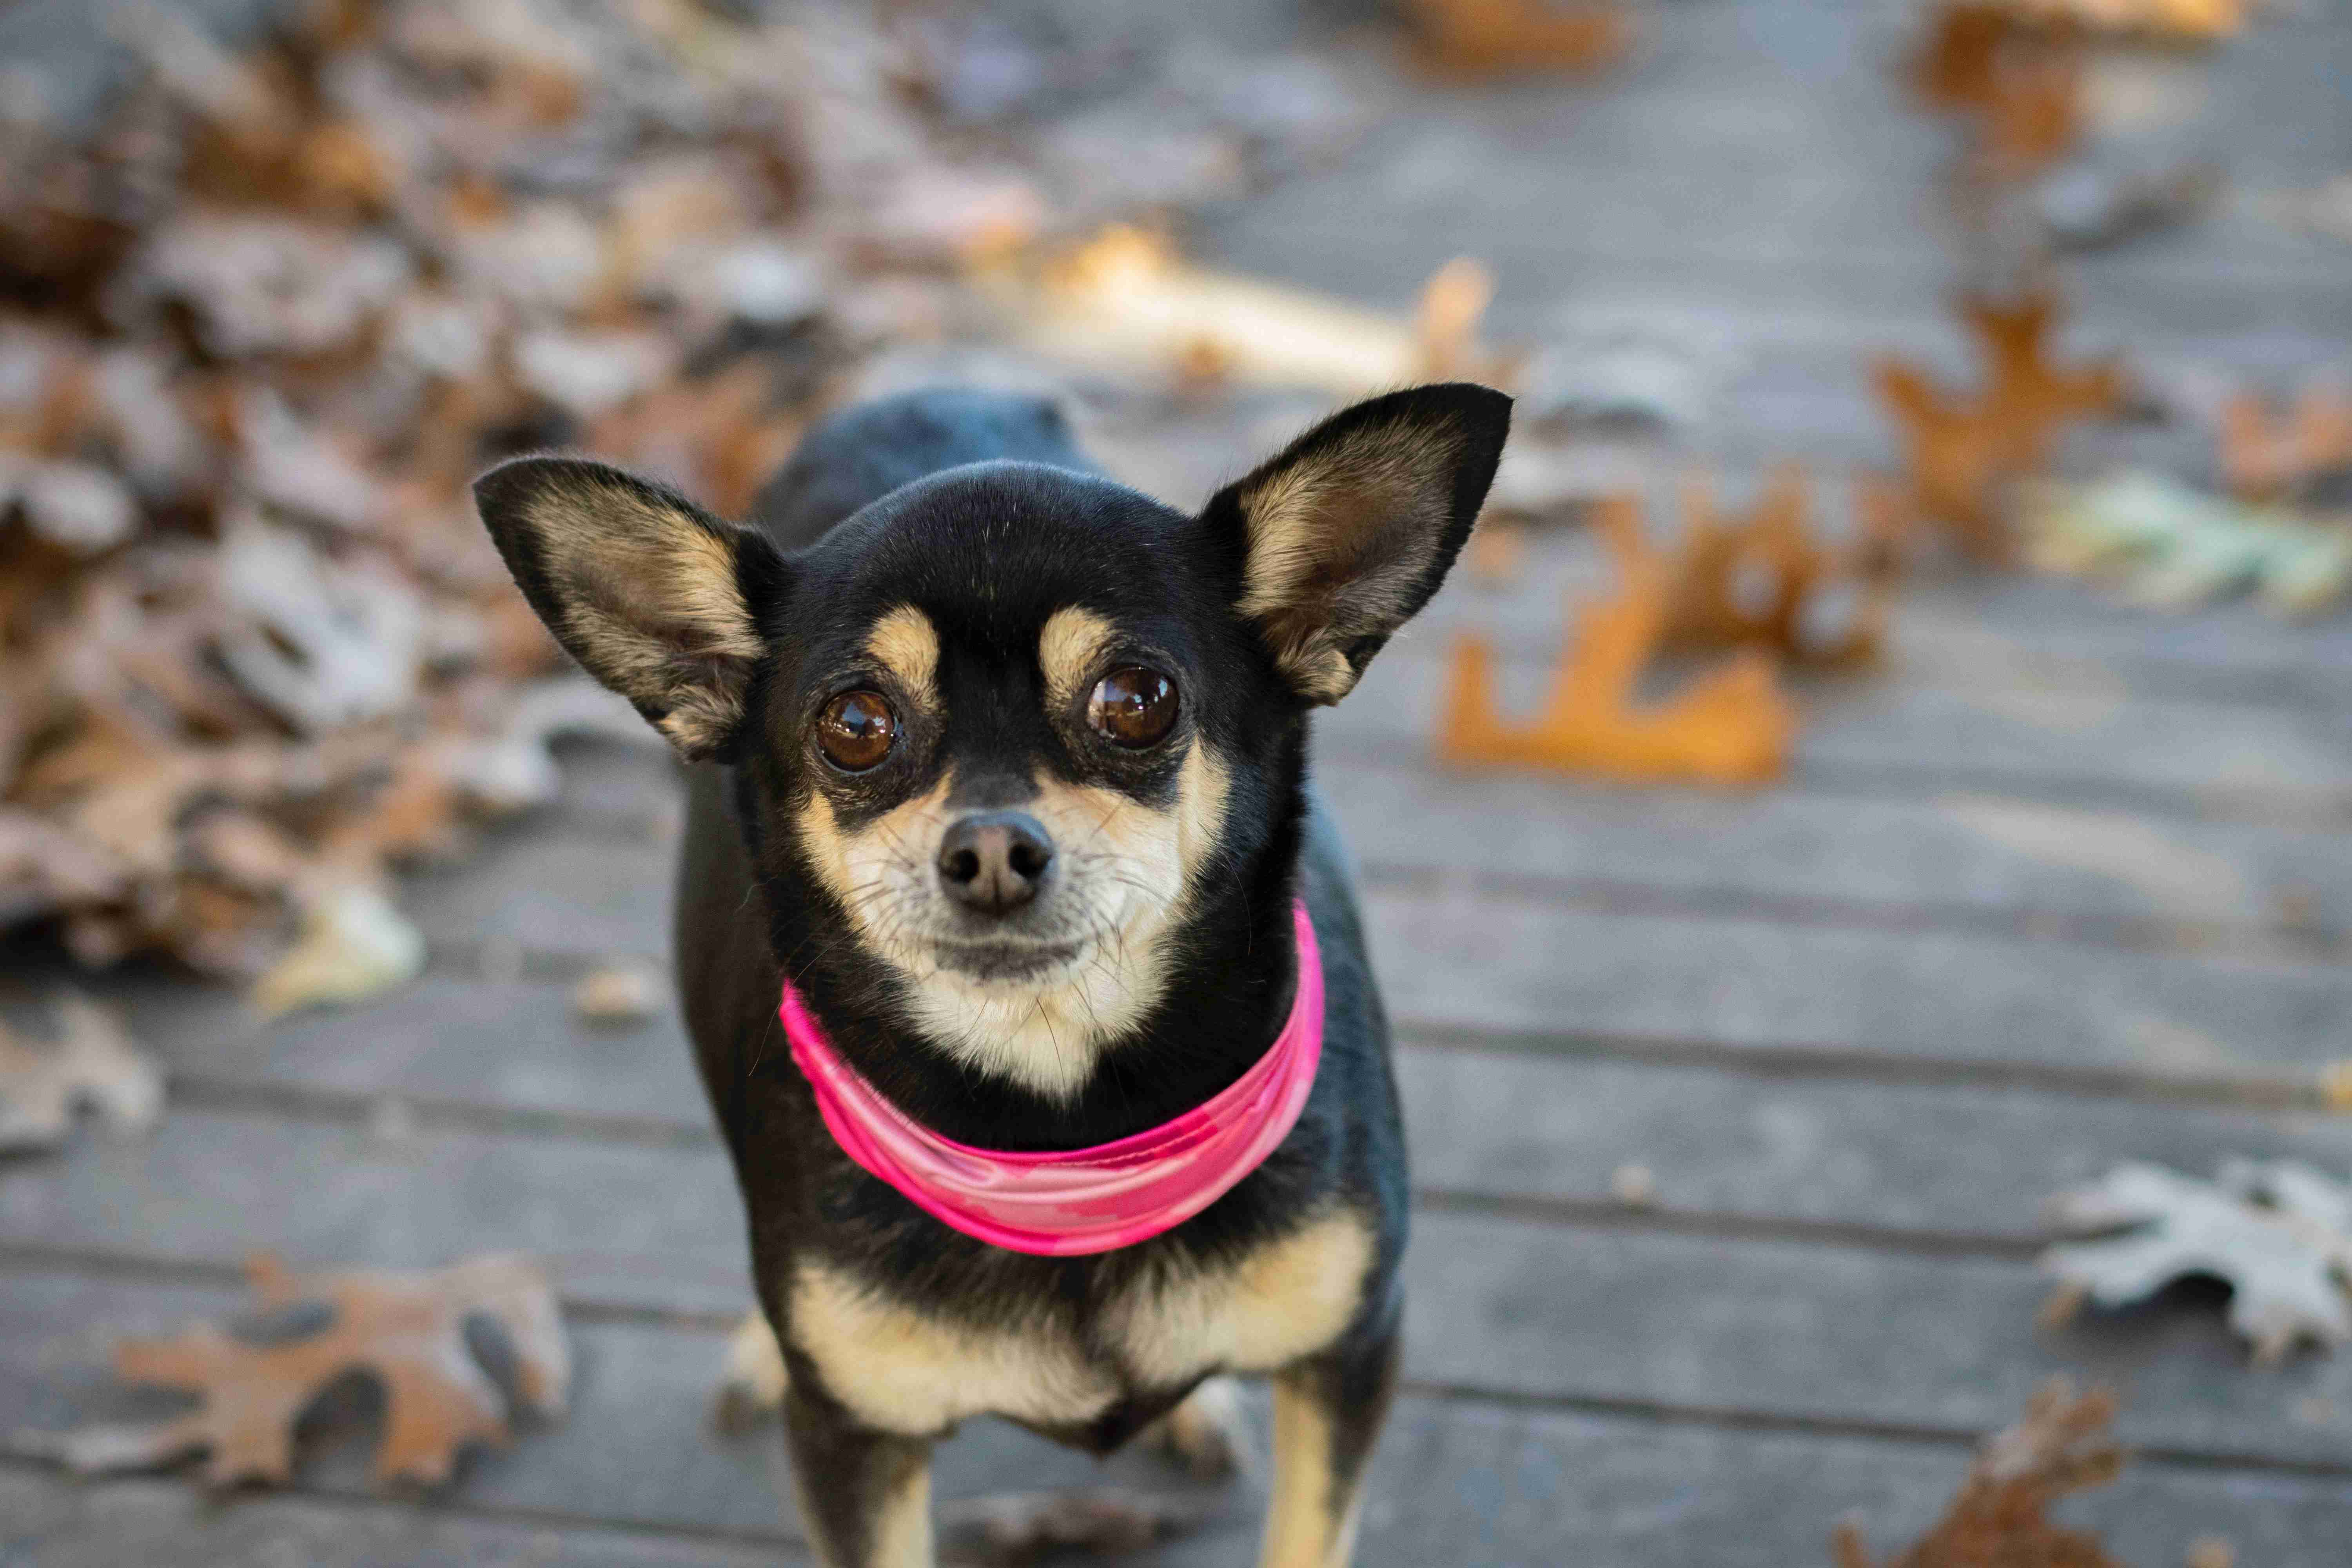 How can you identify signs of anger in a Chihuahua?